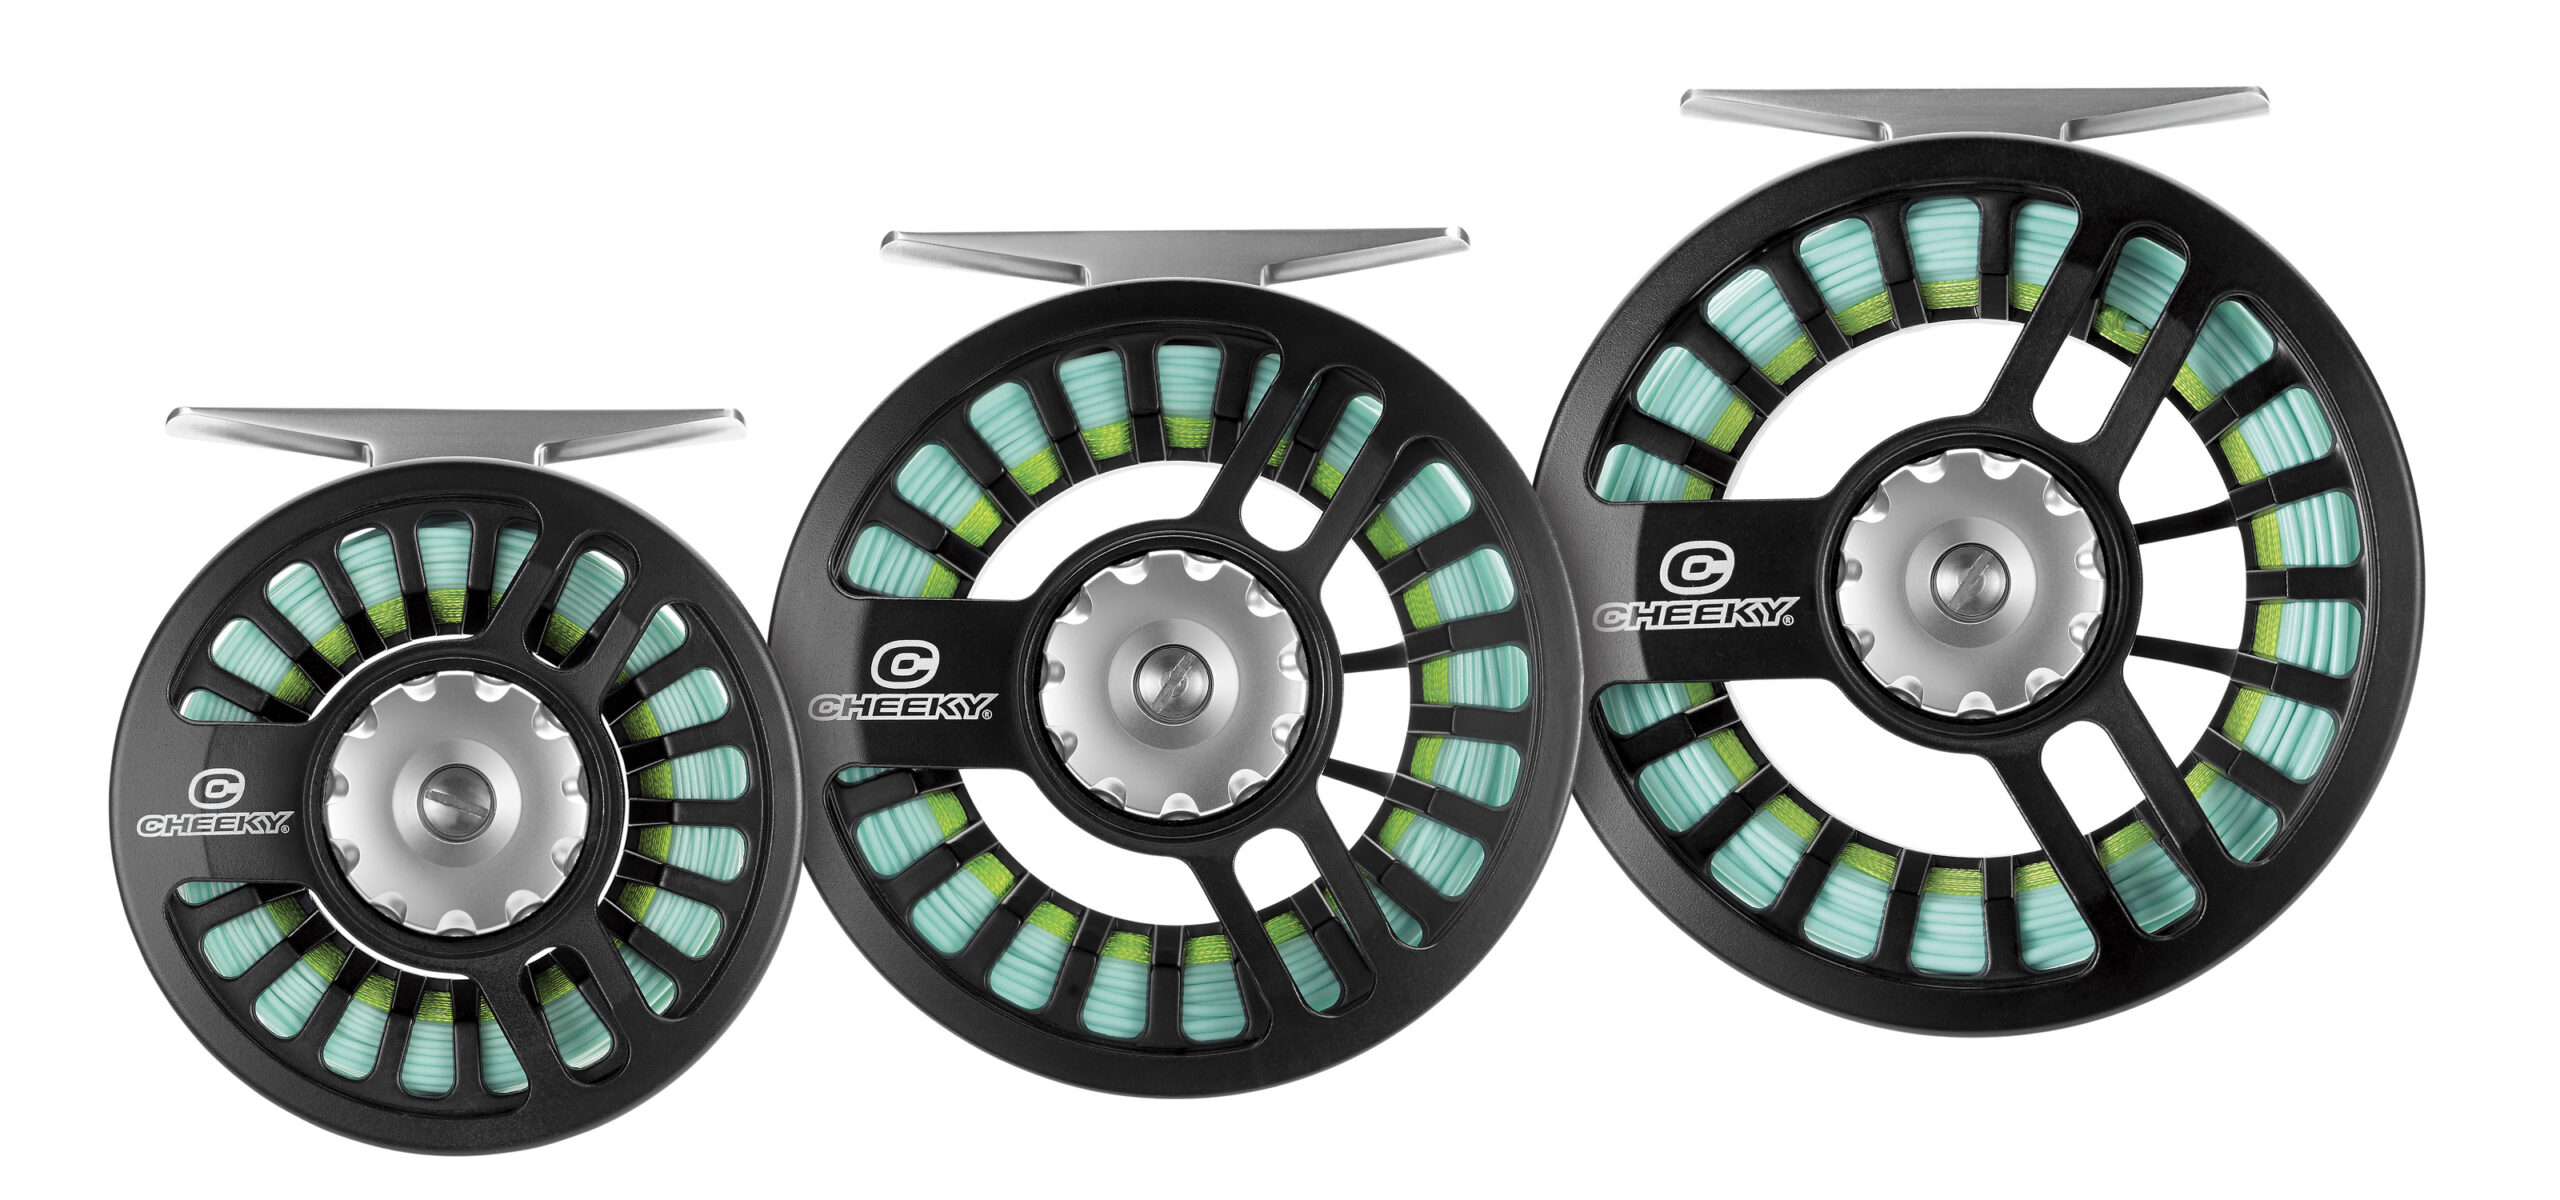 Cheeky PreLoad Reel - $99.99 : Waters West Fly Fishing Outfitters, Port  Angeles, WA